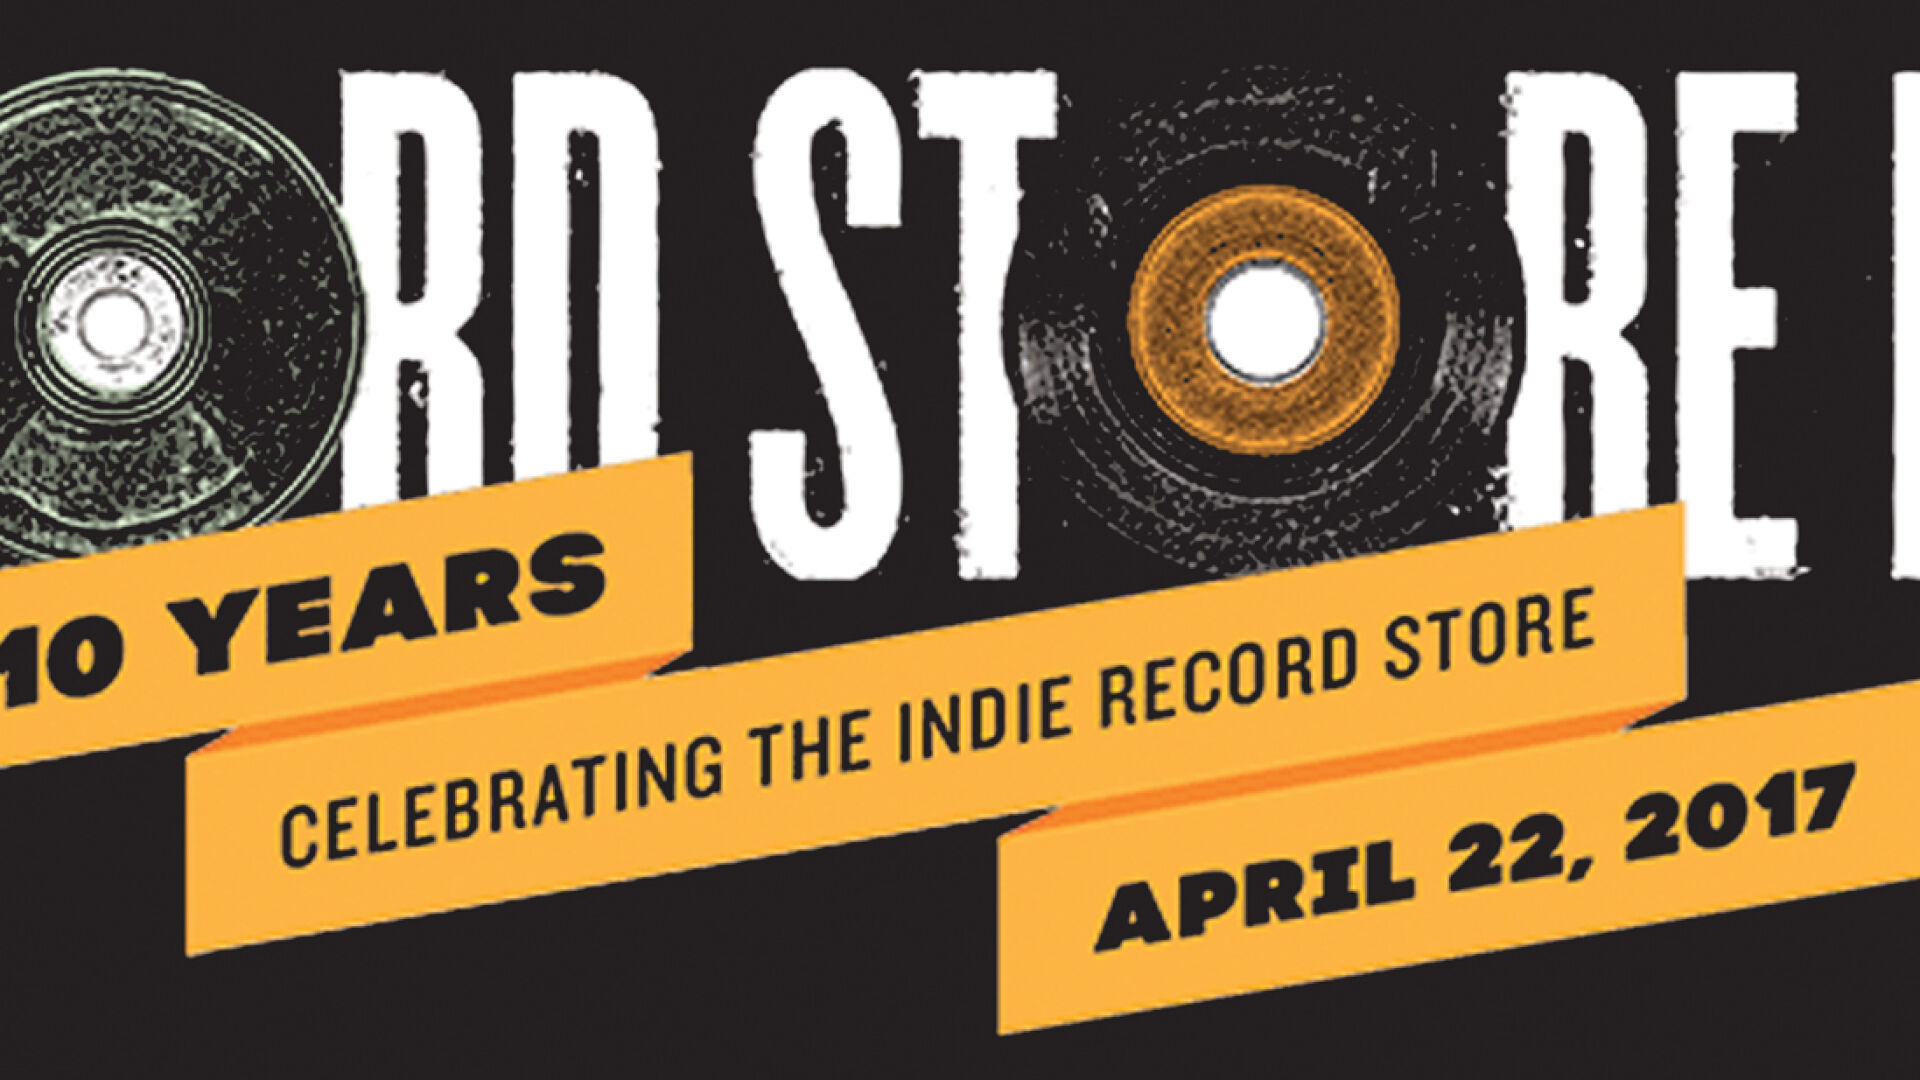 10th annual Record Store Day is April 22